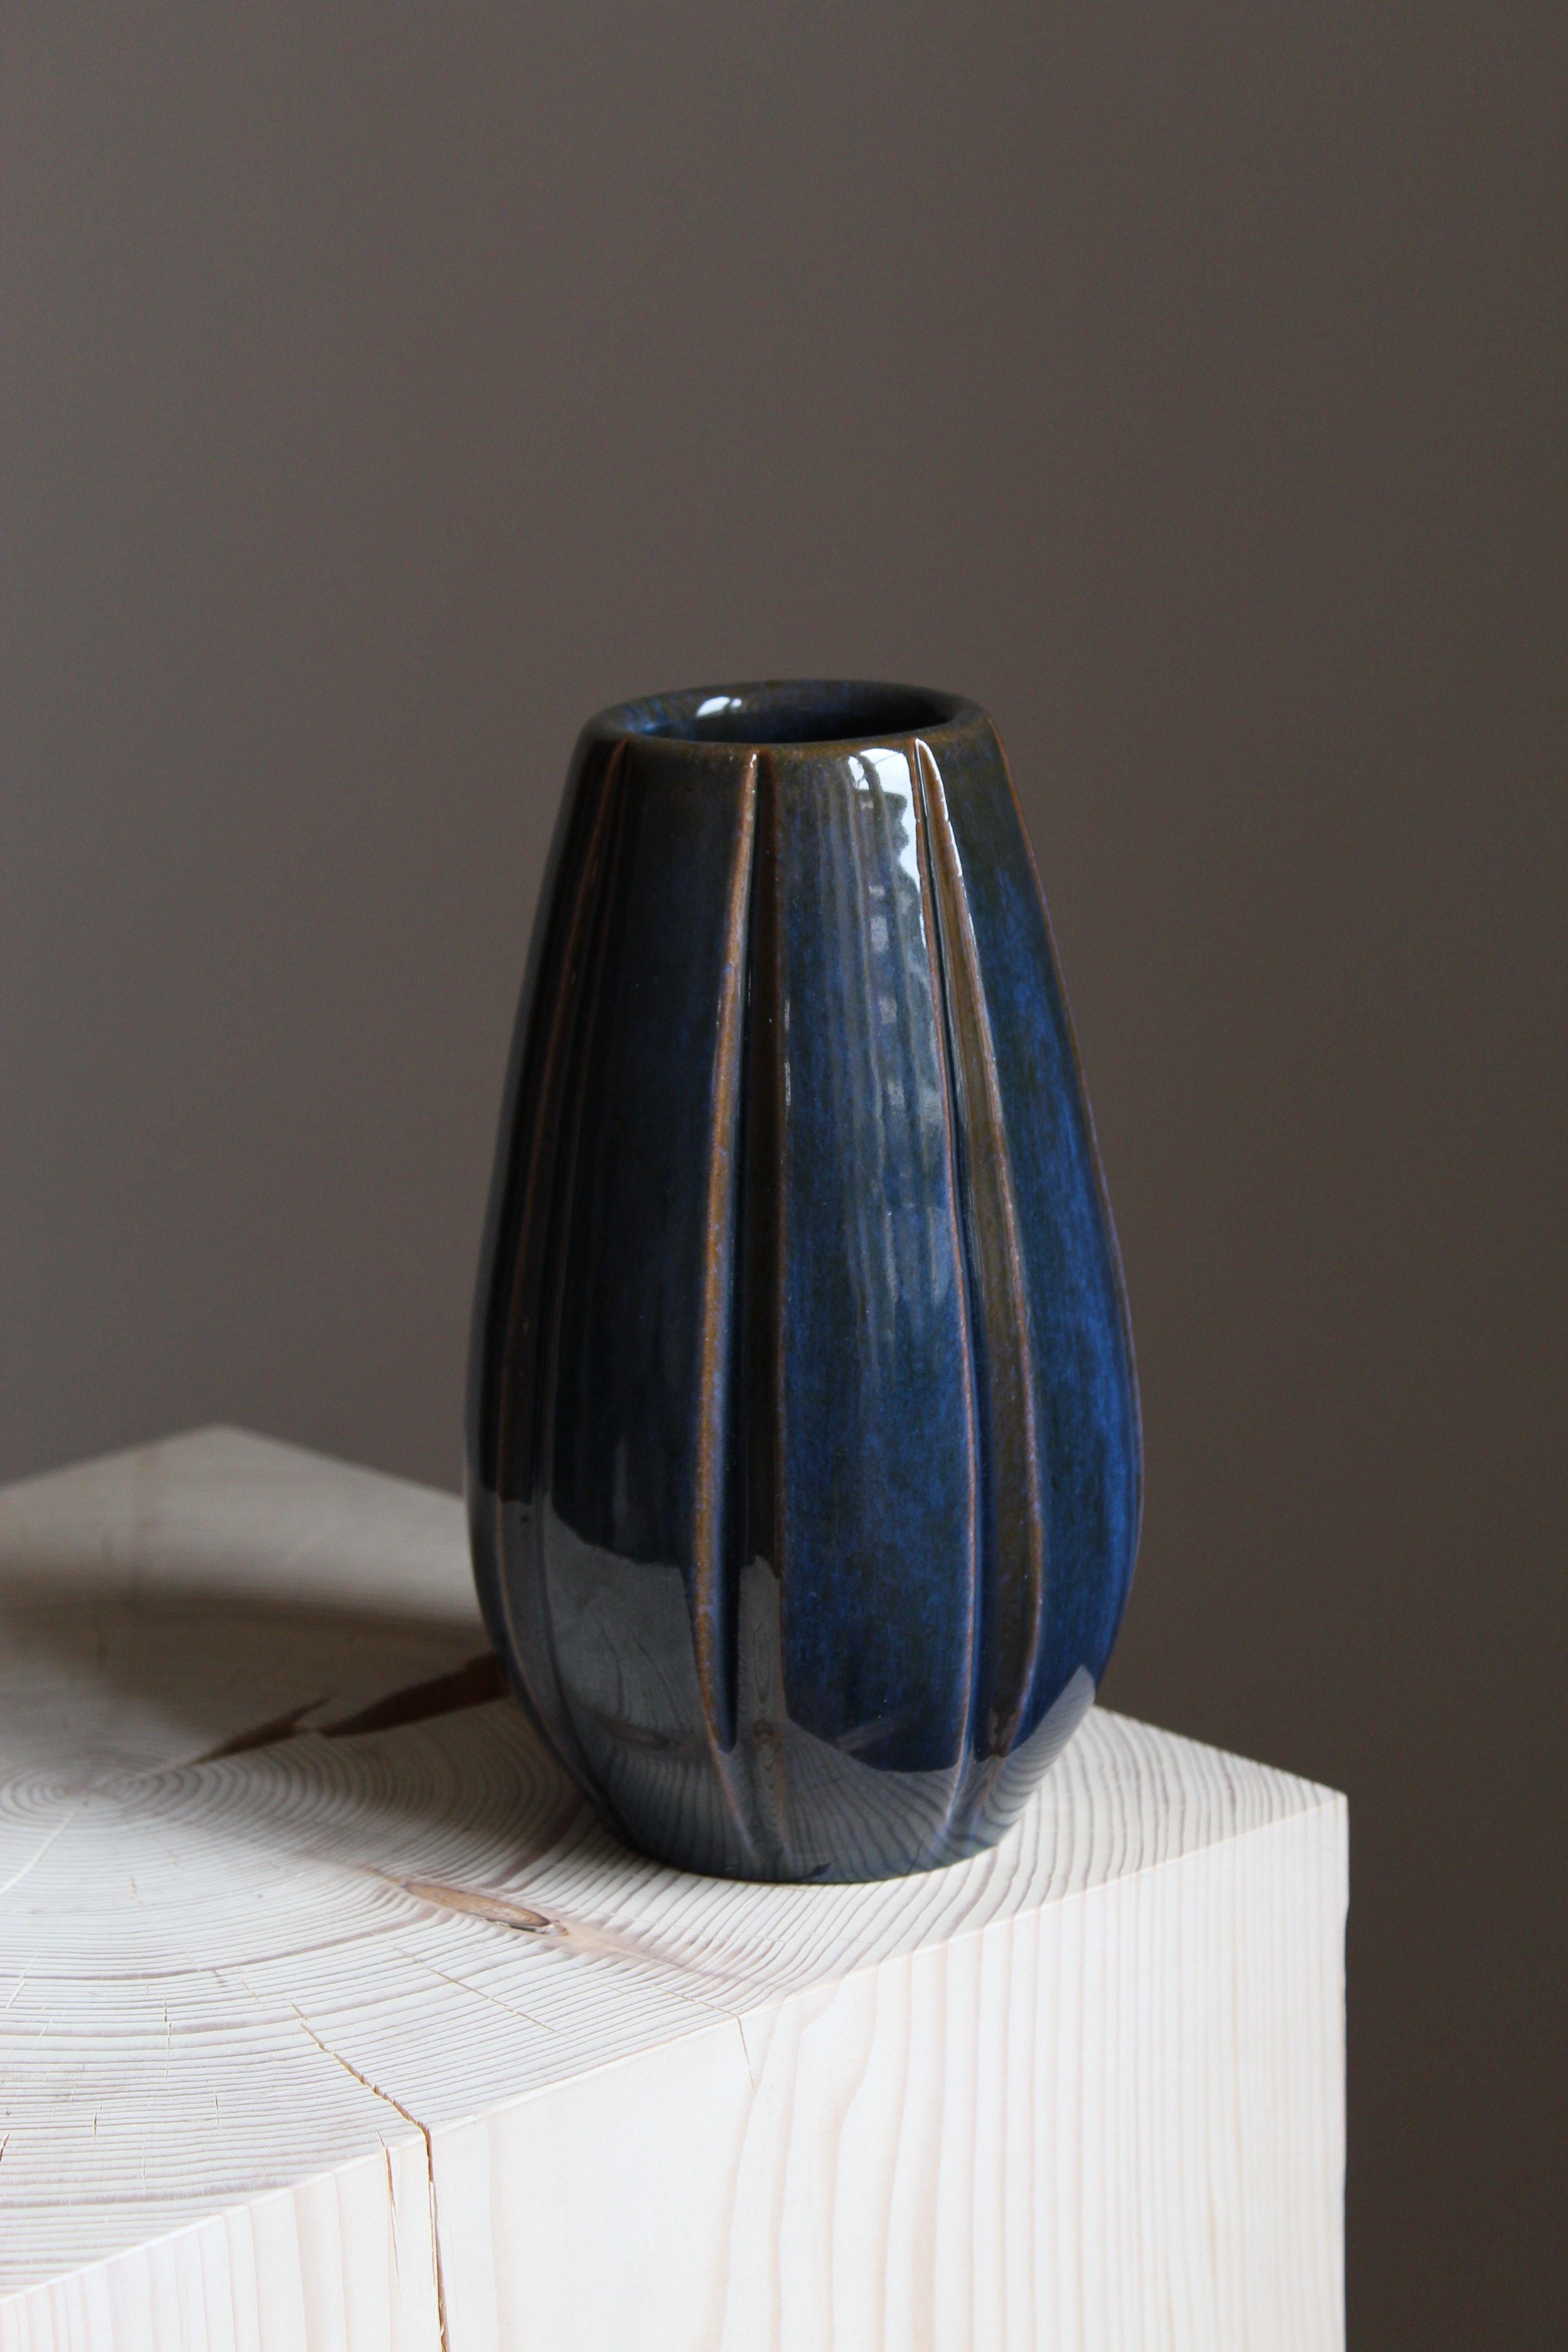 An early modernist vase. Designed by Vicke Lindstrand, for Upsala-Ekeby, Sweden, 1940s. Stamped and signed with artists initials.

Other designers of the period include Ettore Sottsass, Carl Harry Stålhane, Lisa Larsson, Axel Salto, and Arne Bang.